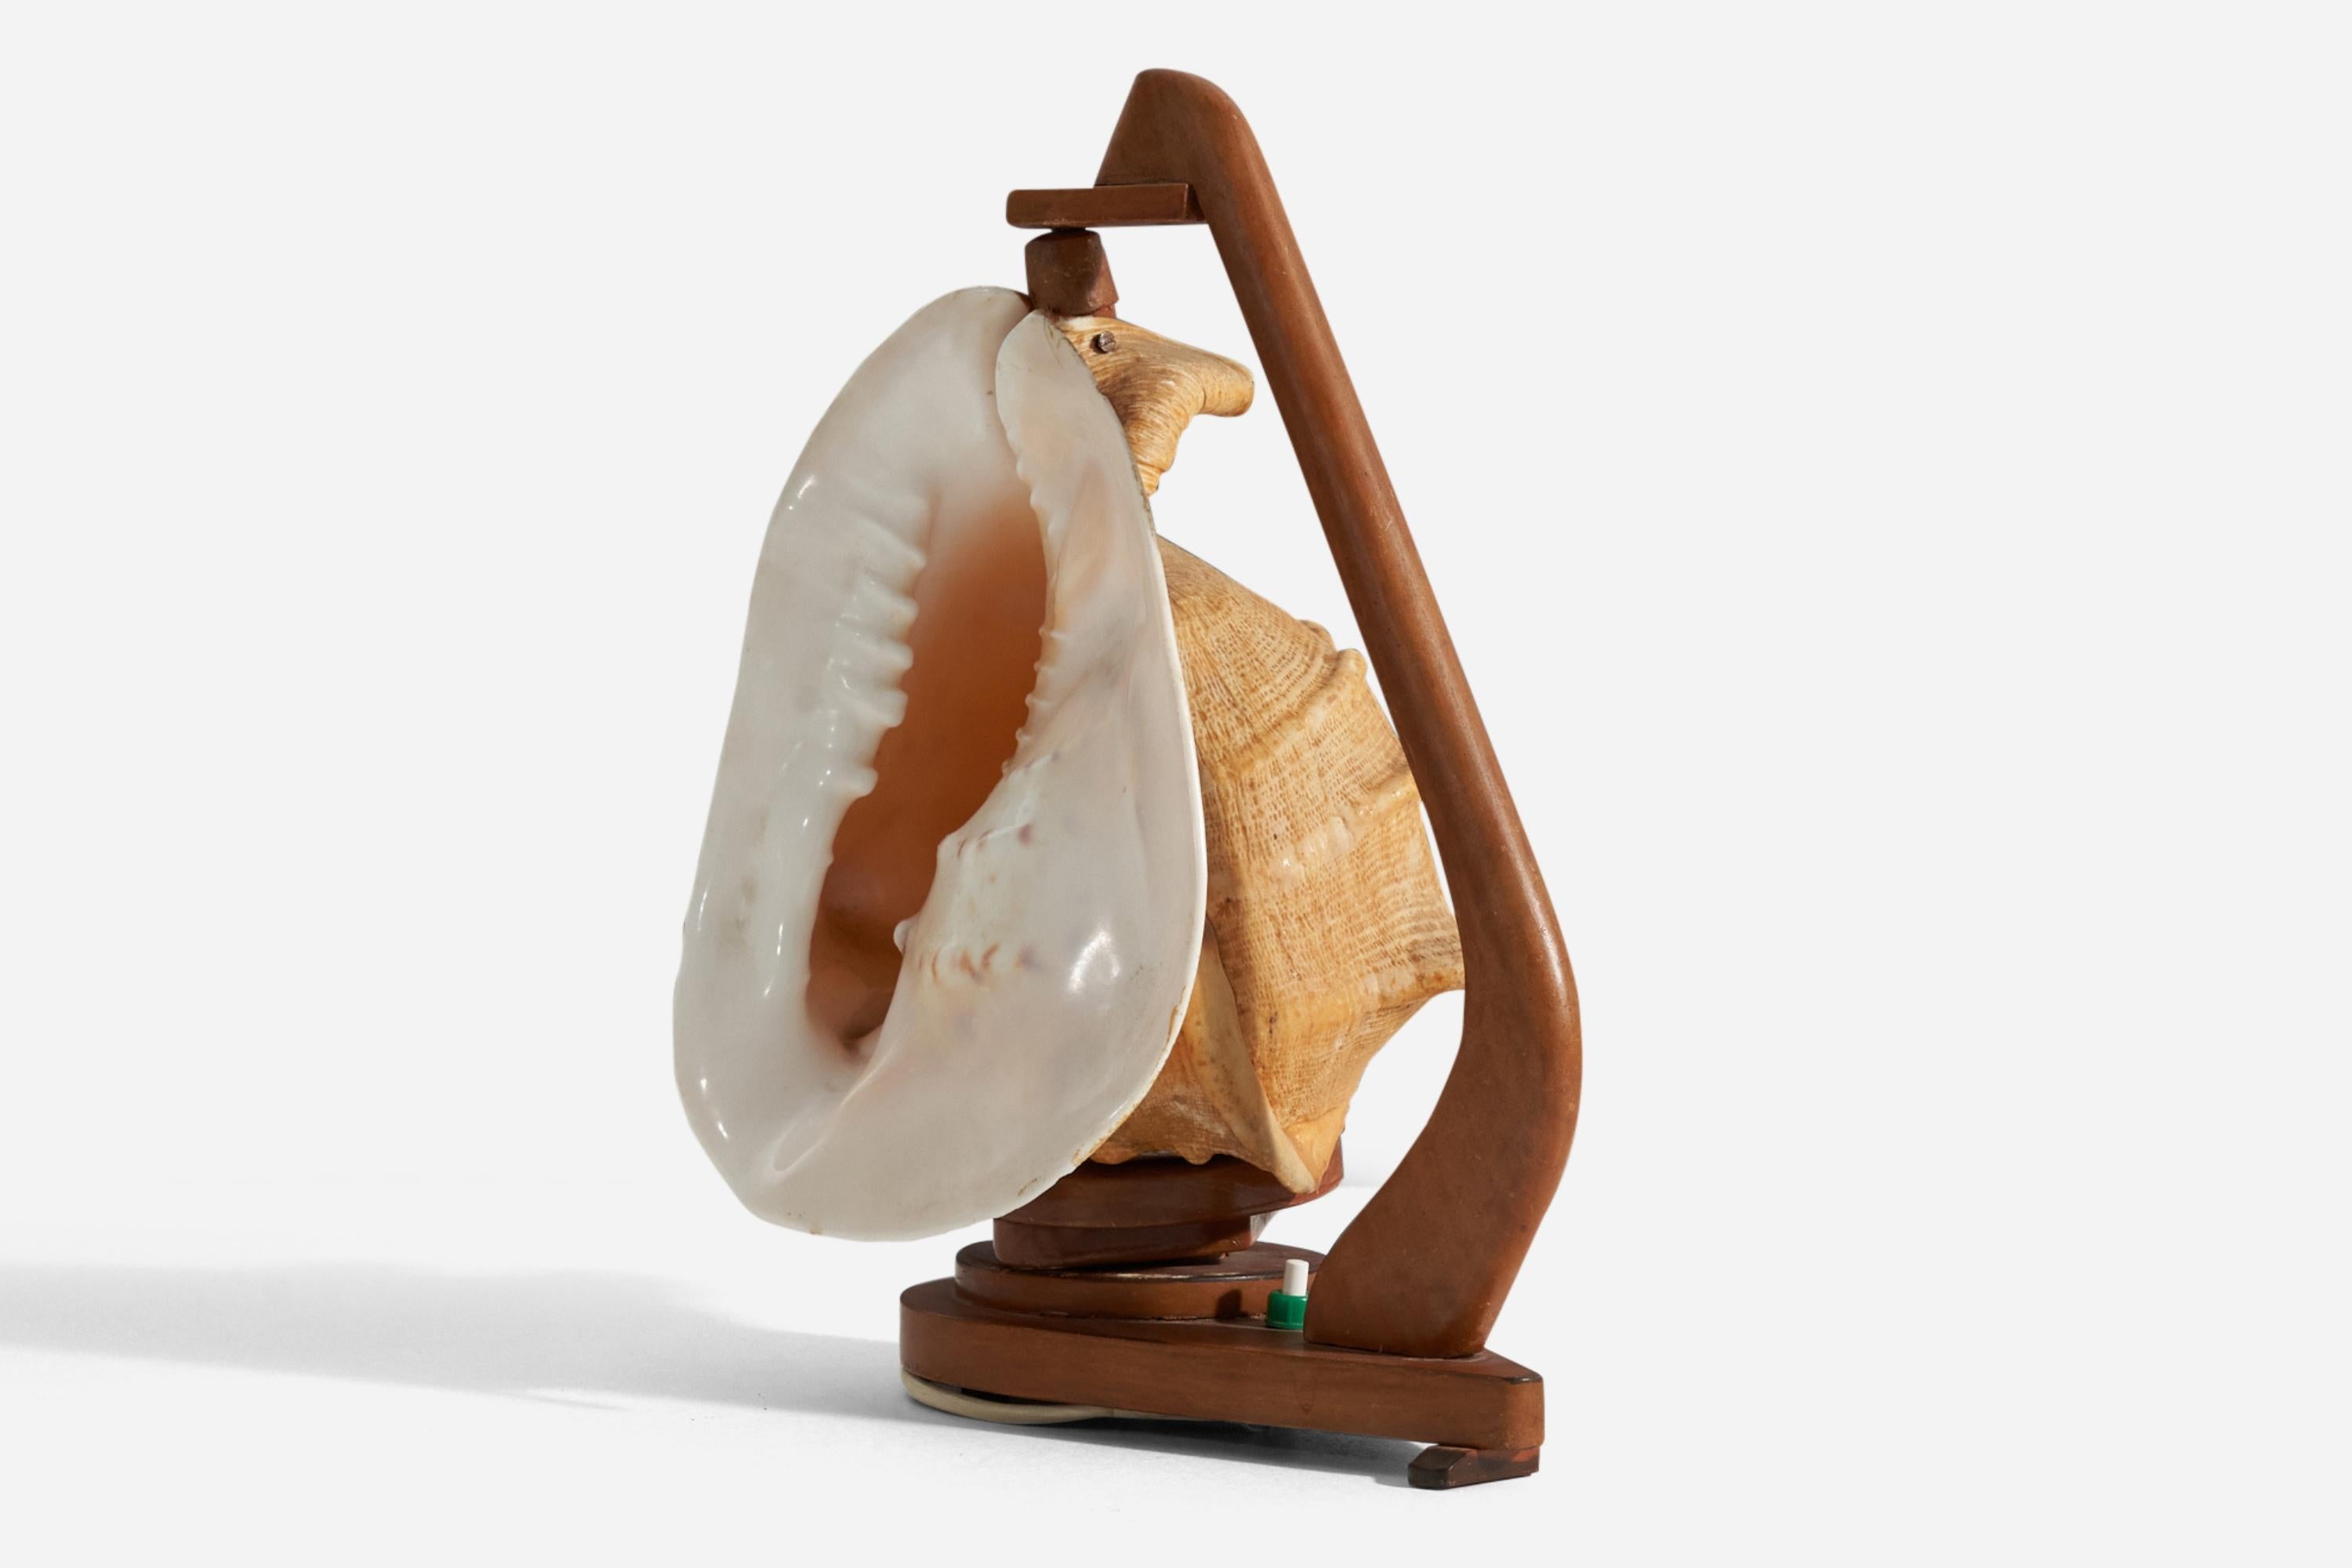 A table lamp in stained wood with an adjustable shell diffuser. Designed and produced in Sweden, c. 1940s.